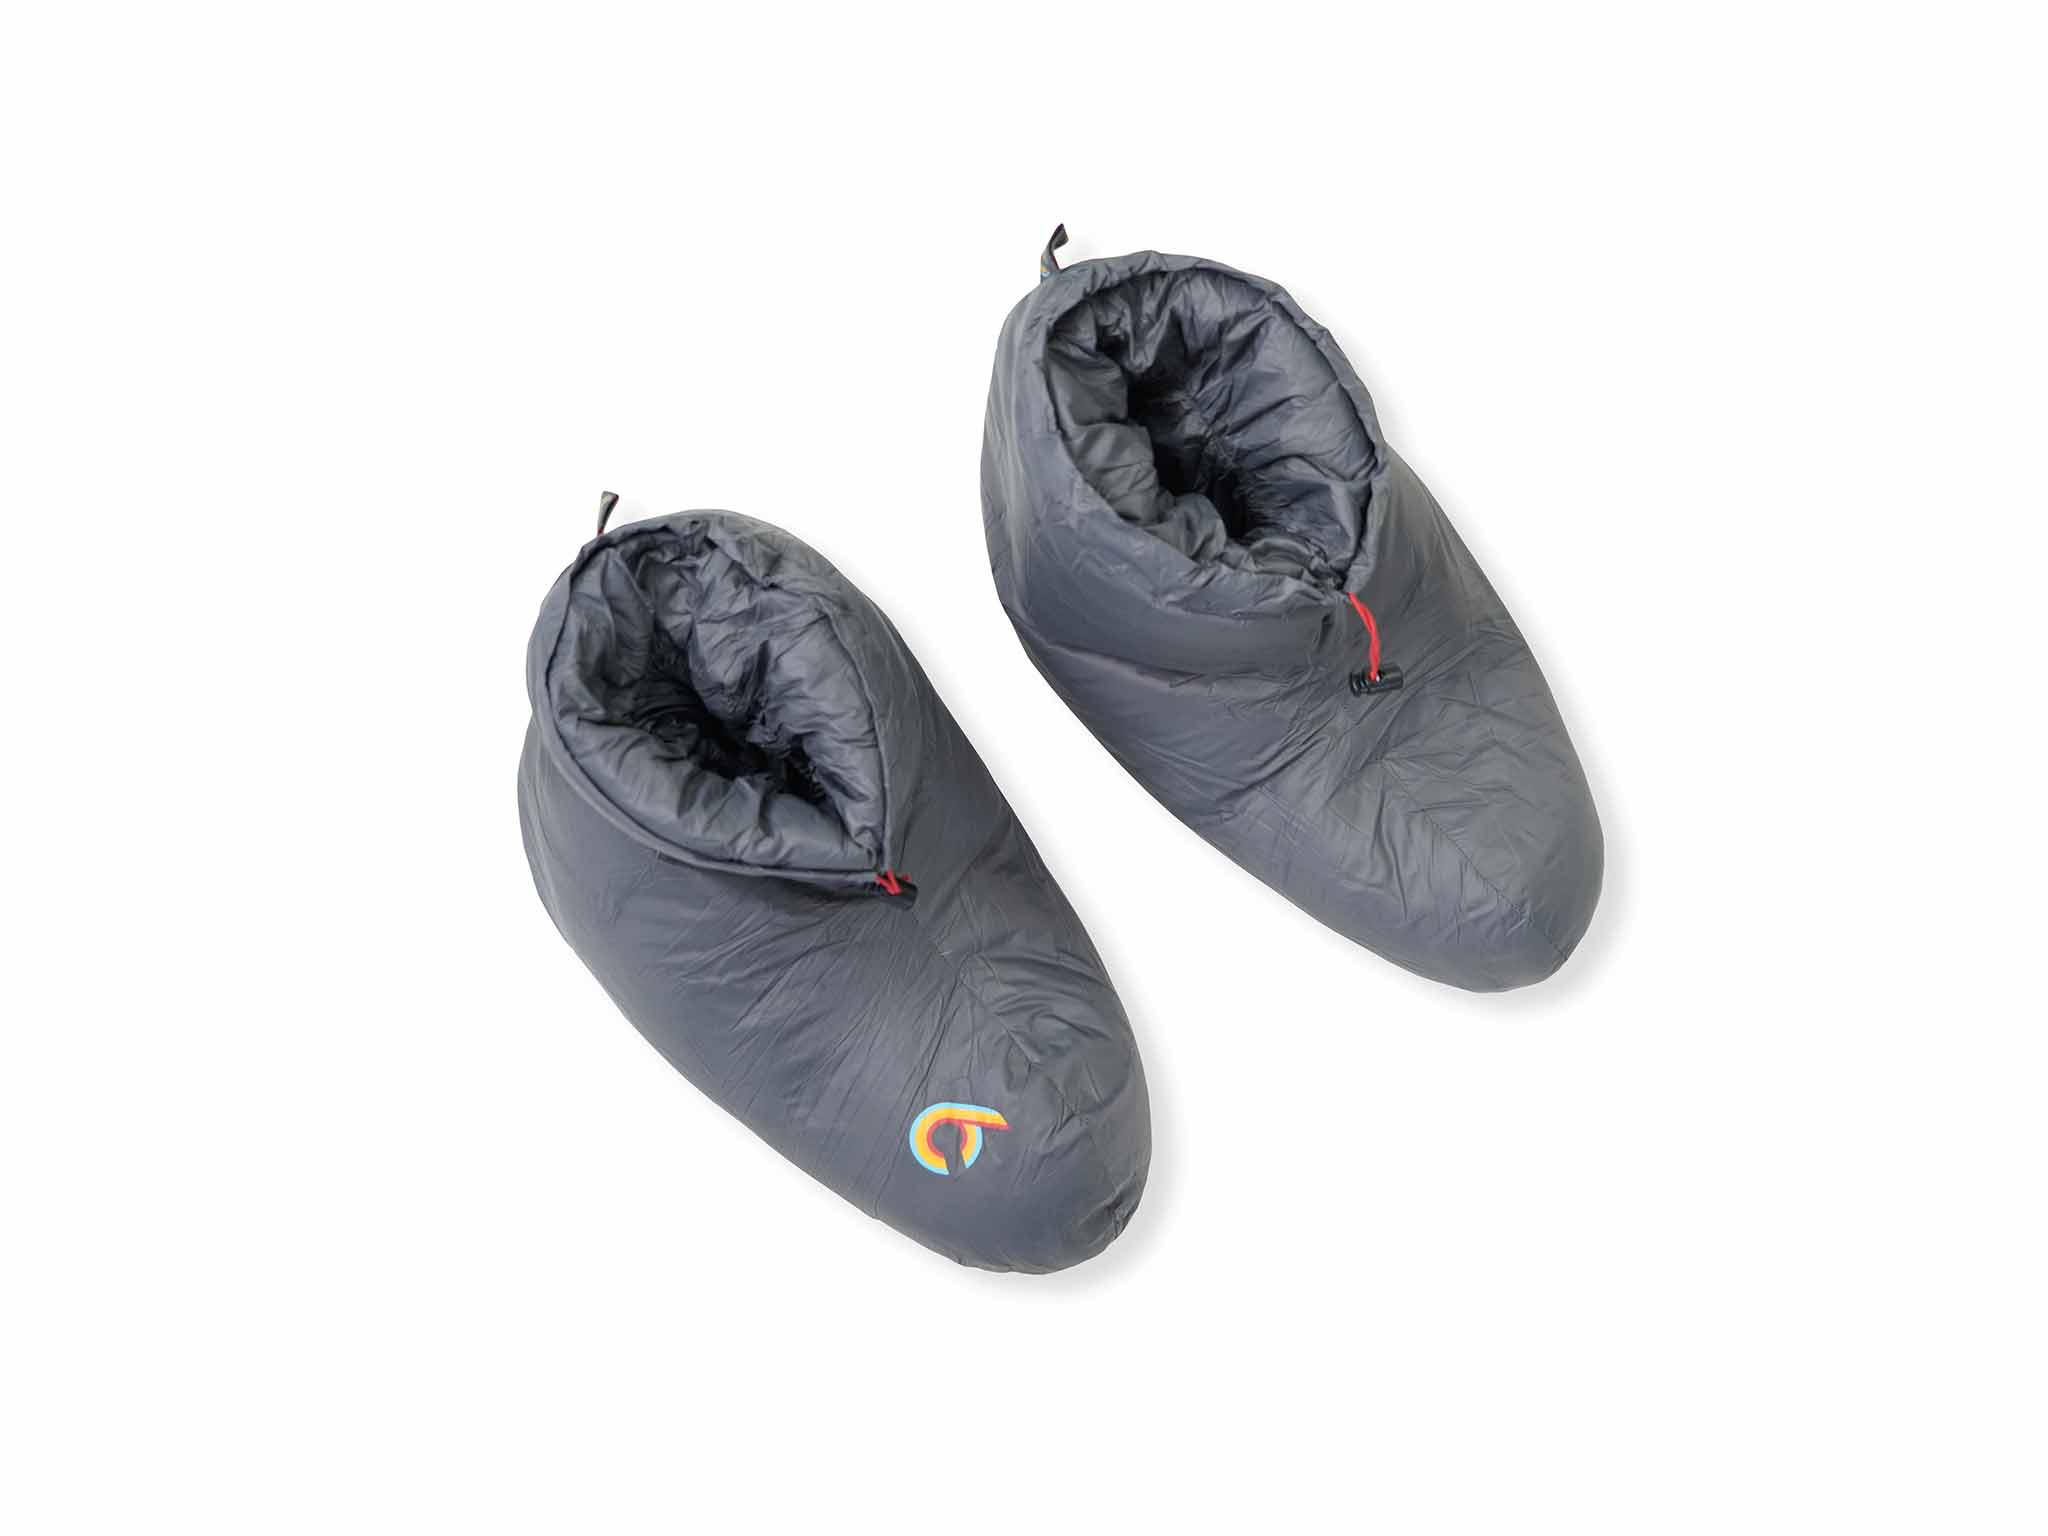 LARGE slooze pair c6 outdoor